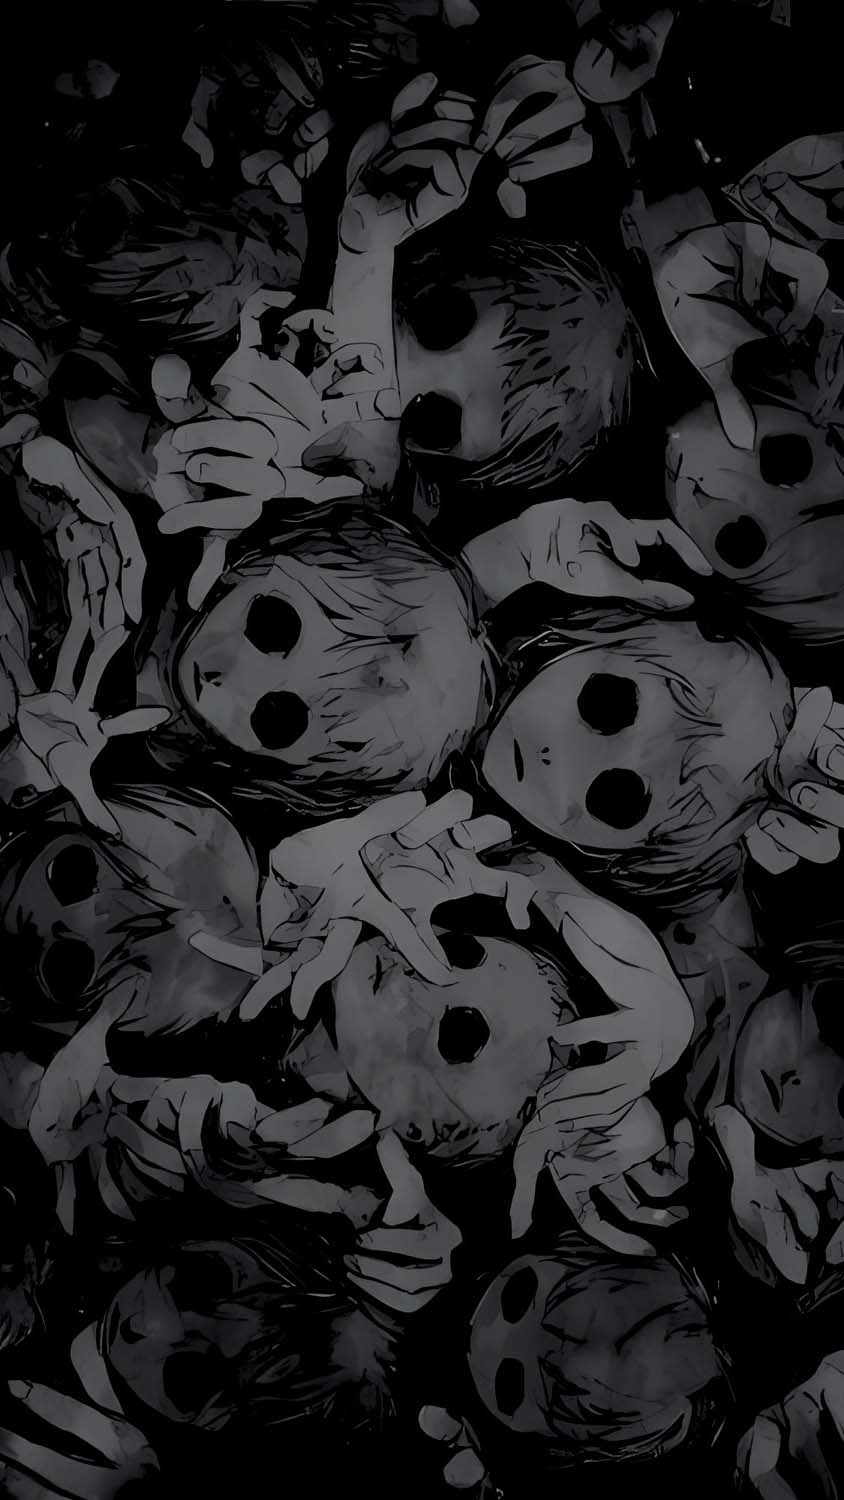 Amoled Horror IPhone Wallpaper HD  IPhone Wallpapers